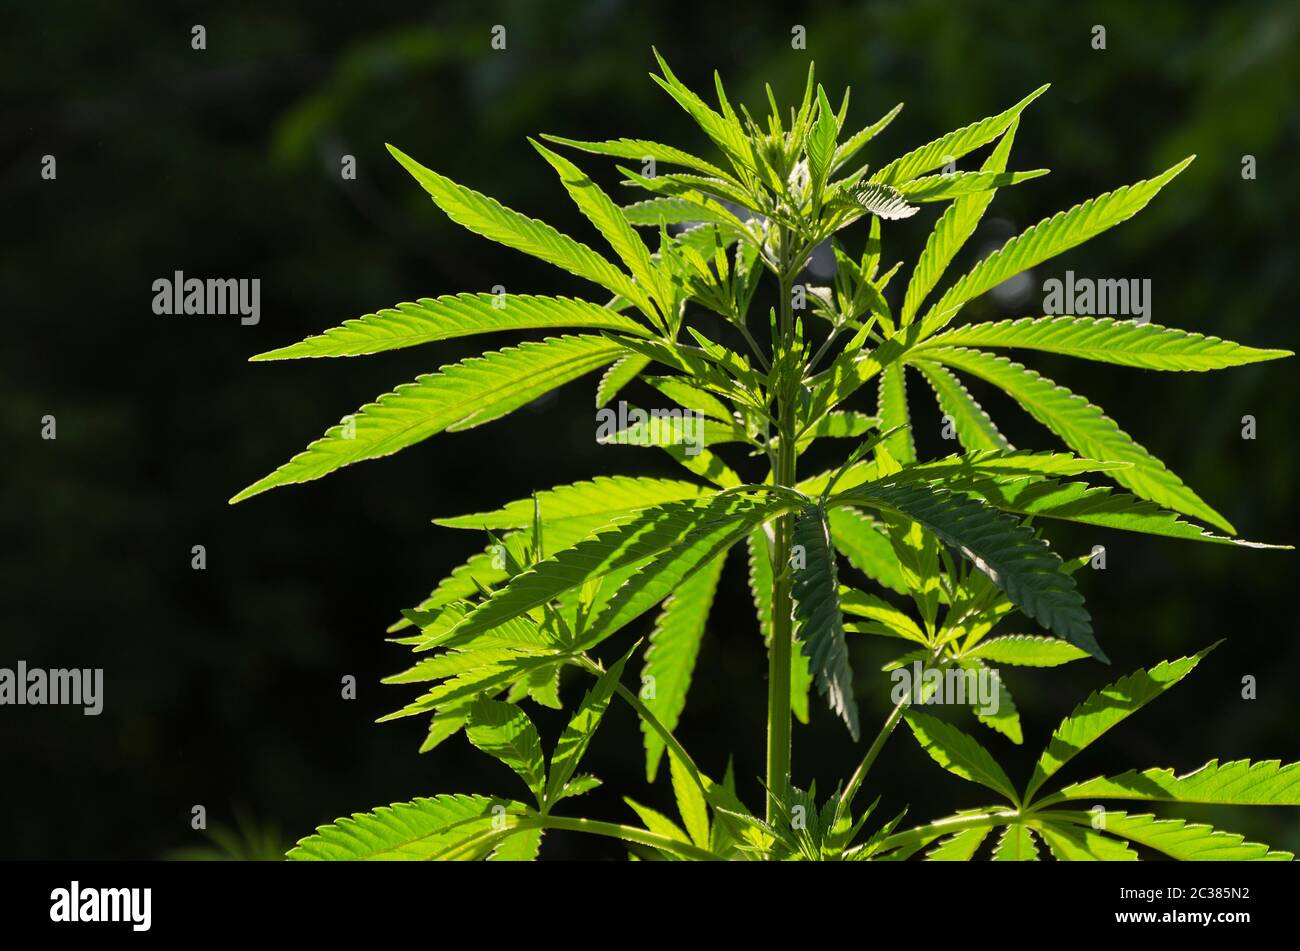 Green background of leaves. Young cannabis plant 2 Stock Photo